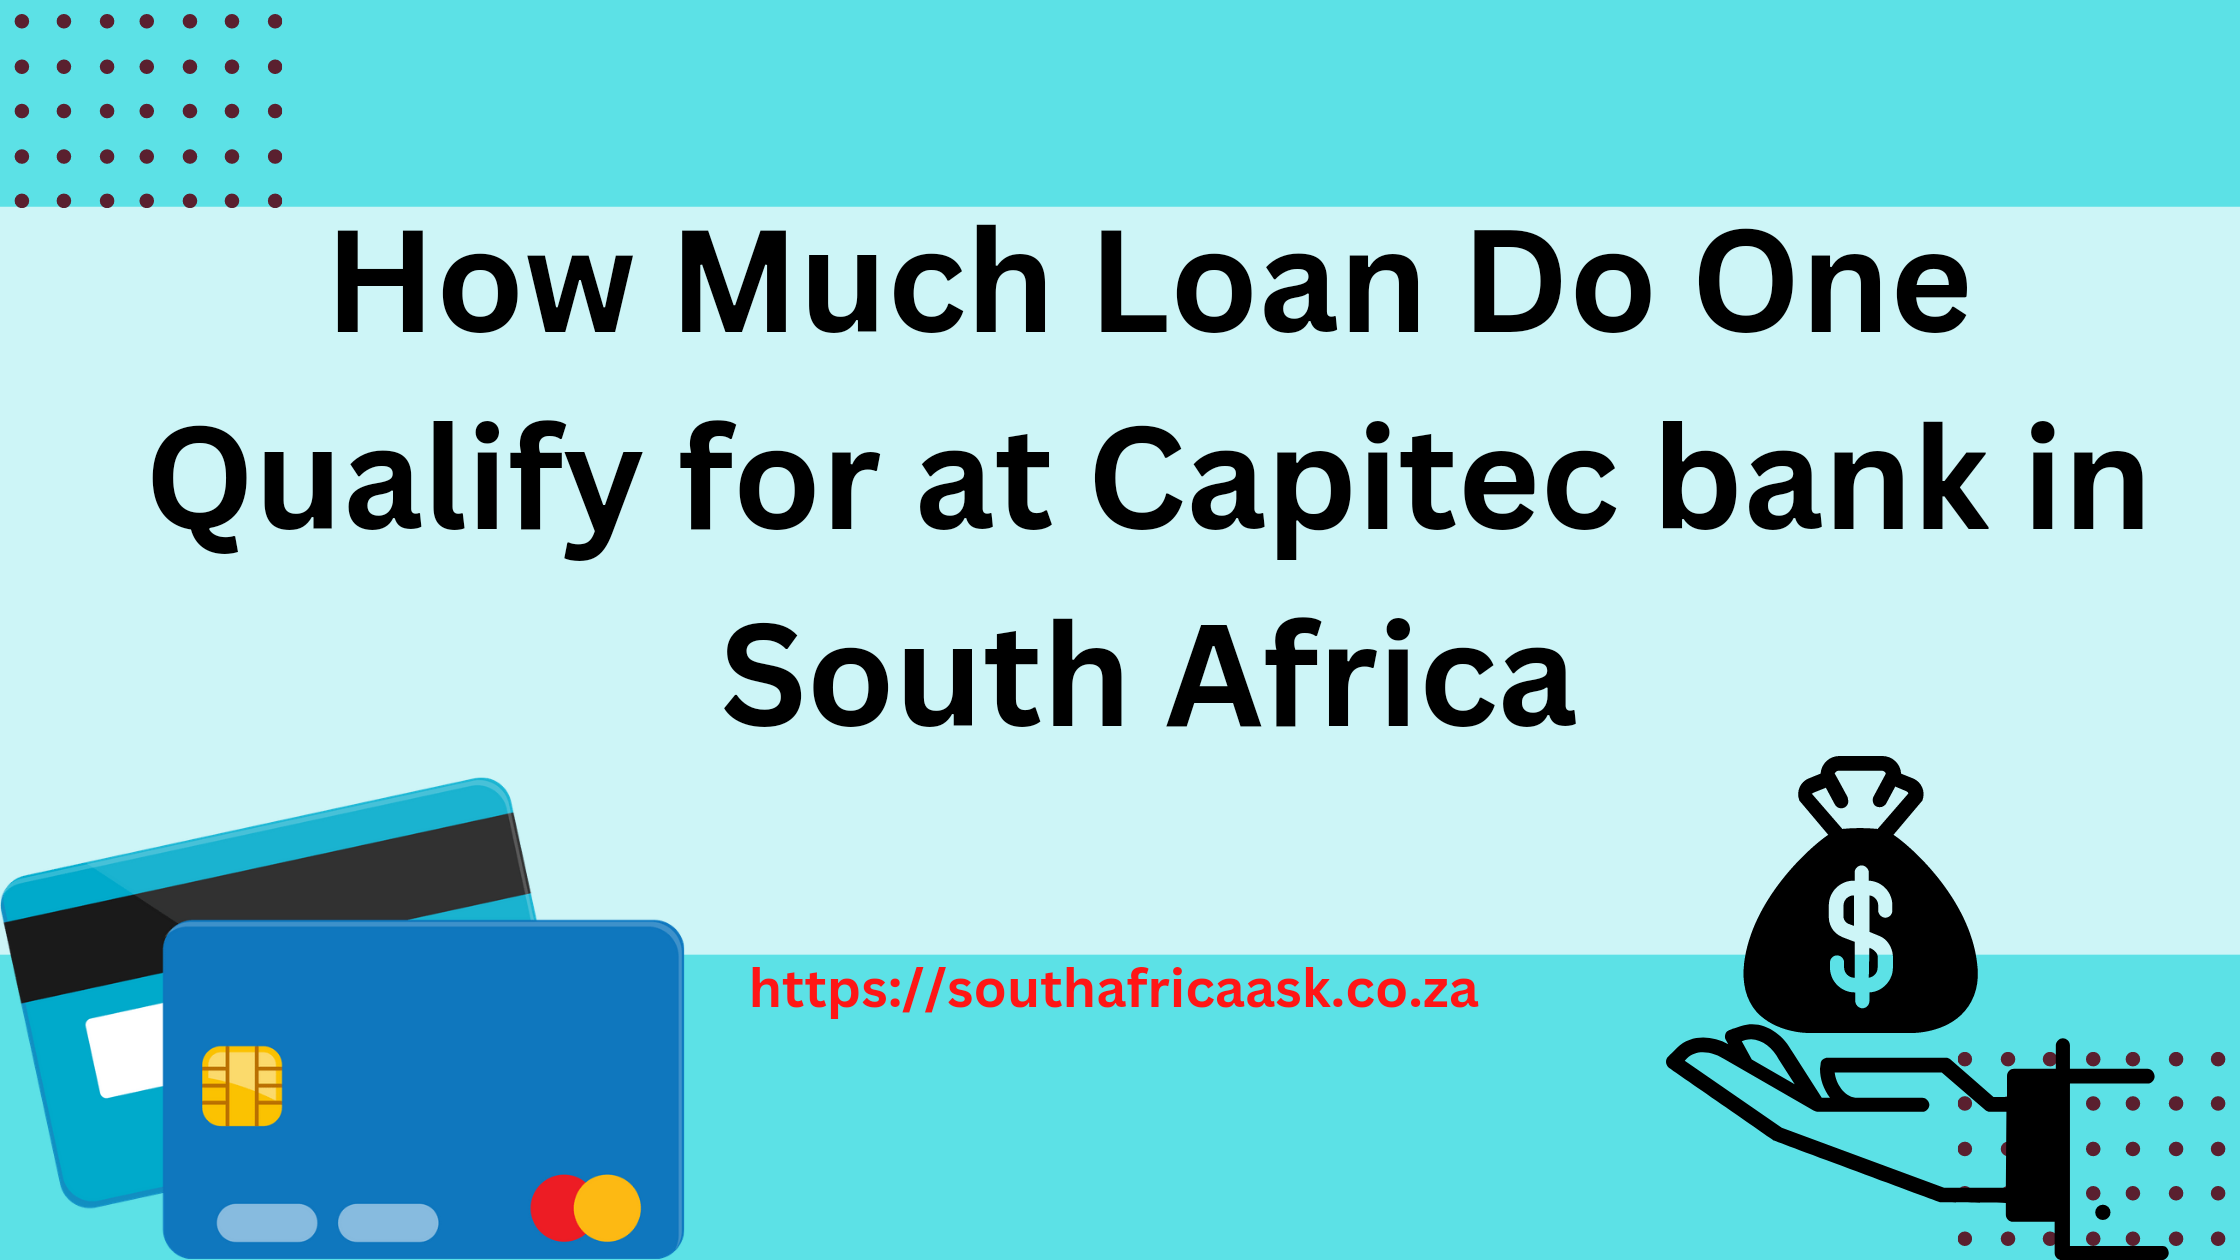 How Much Loan Do One Qualify for at Capitec bank in South Africa